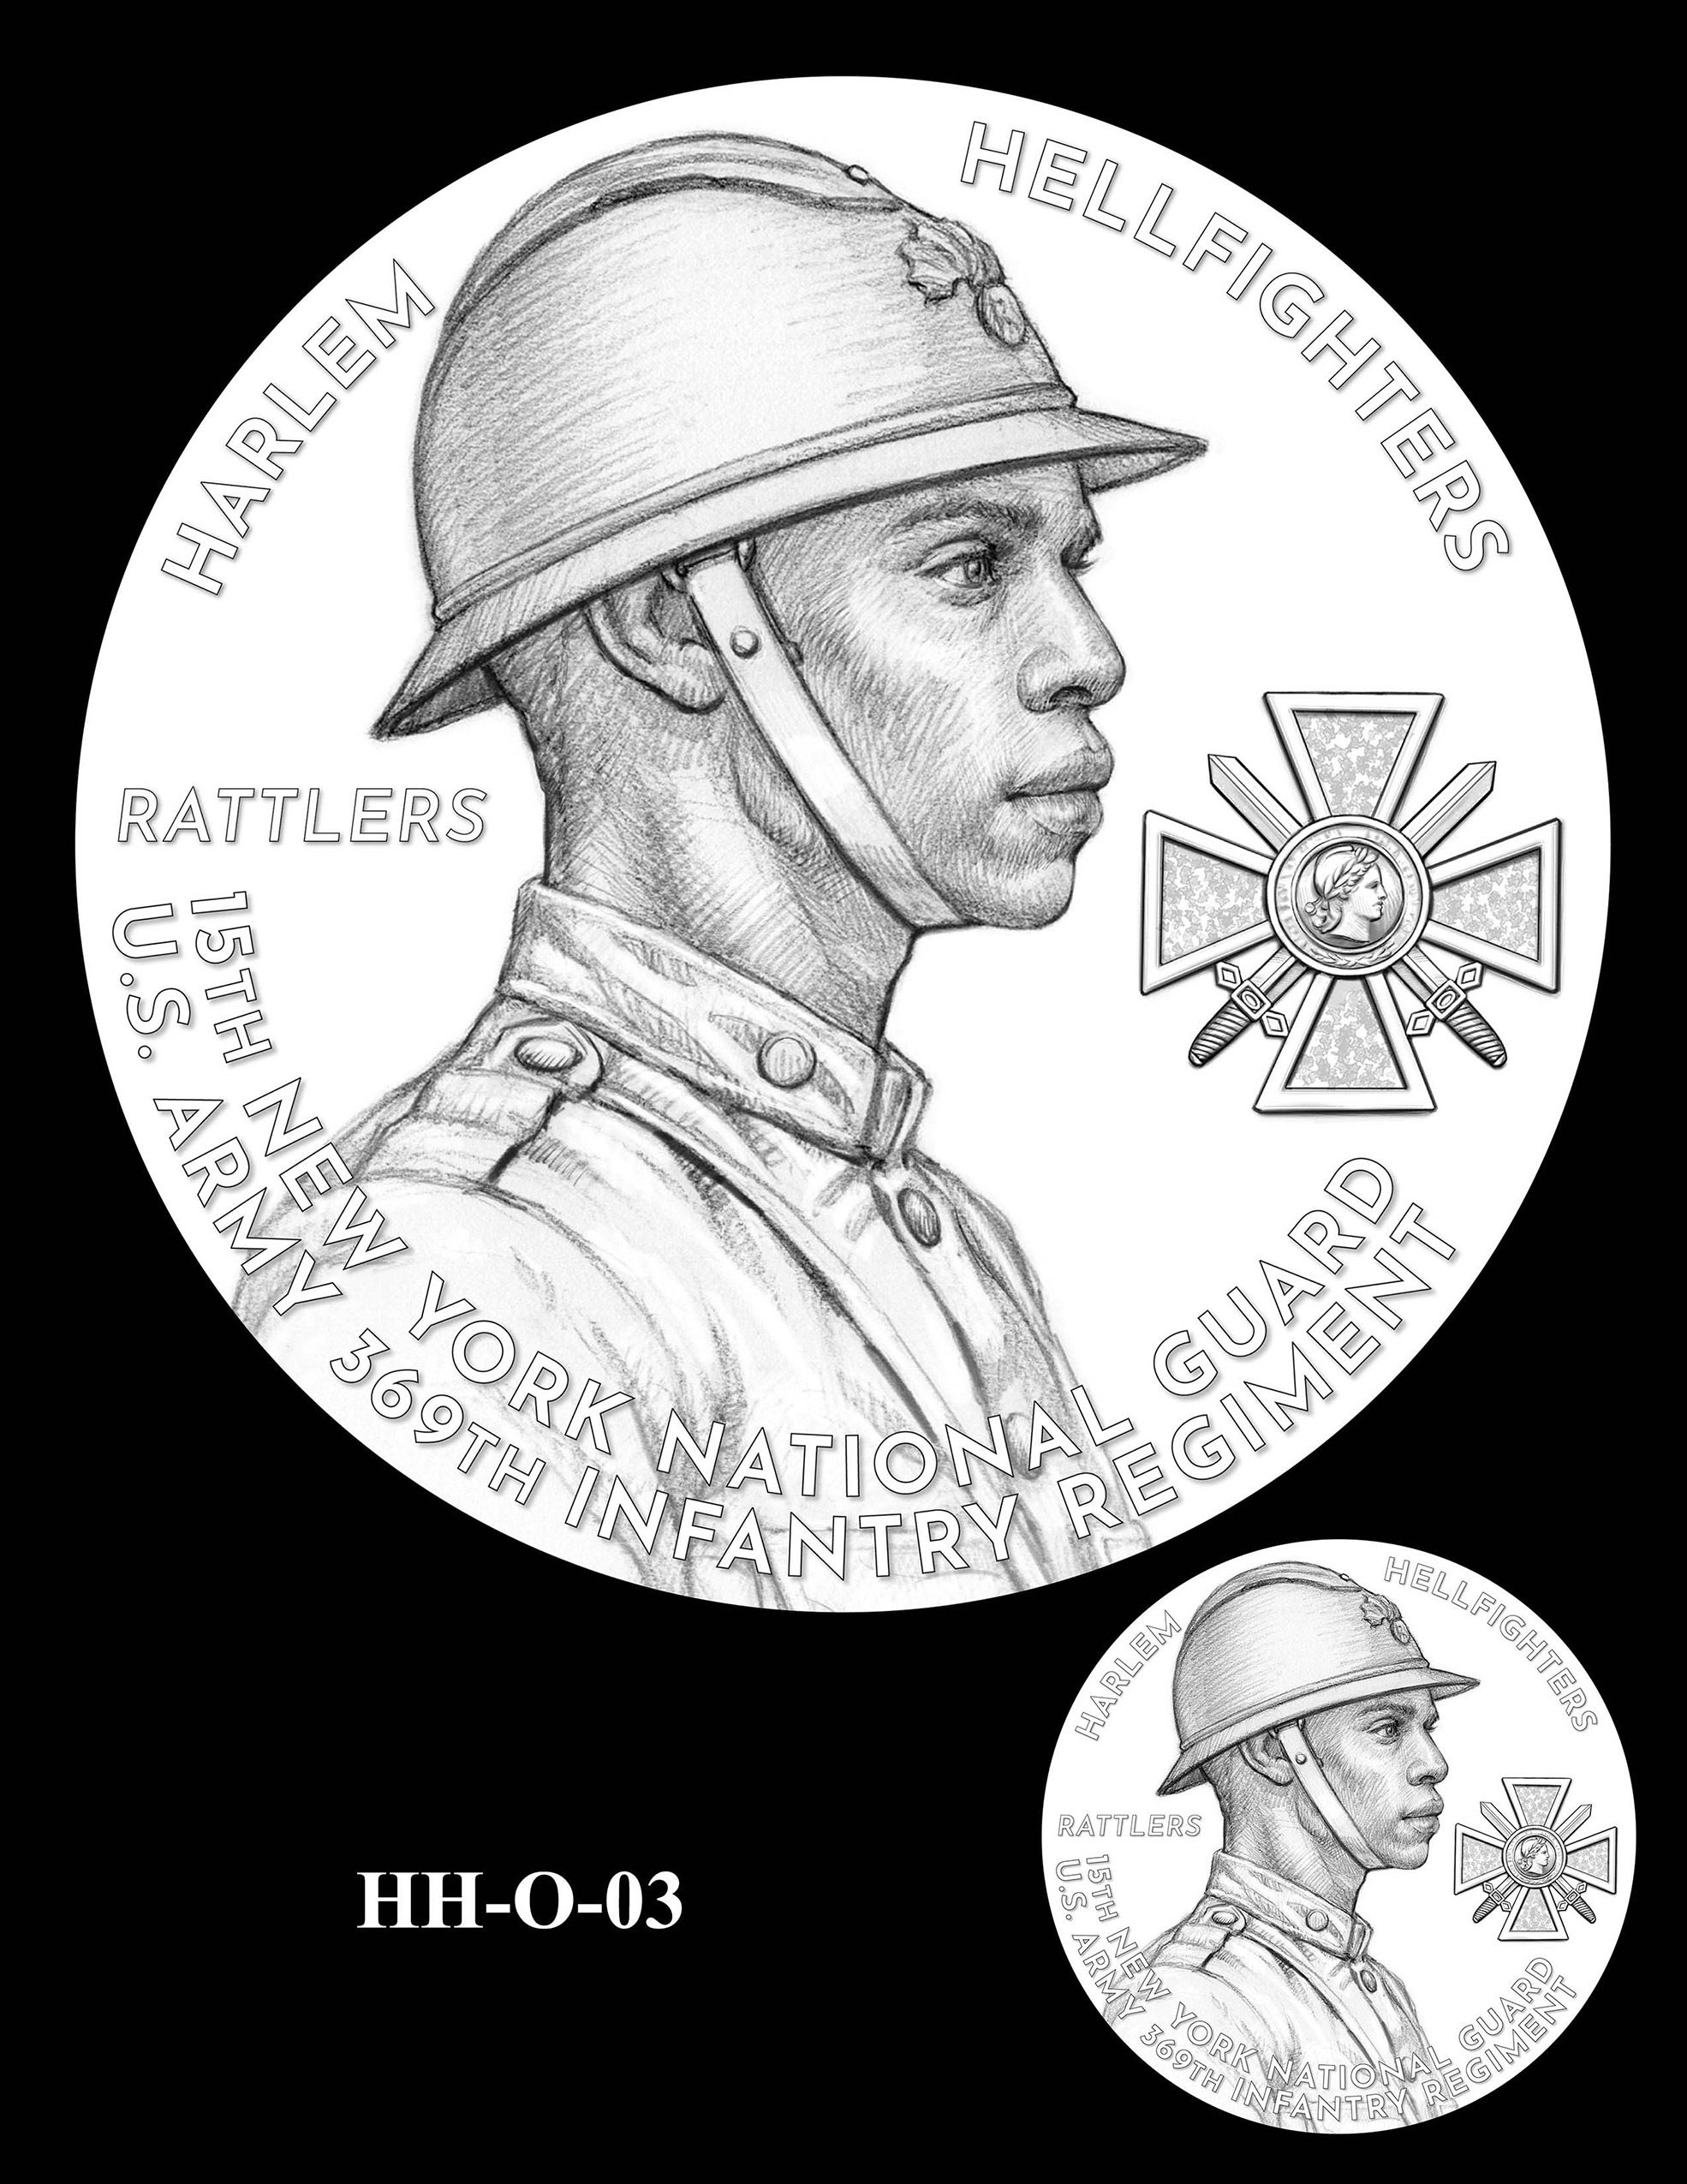 HH-O-03 -- Harlem Hellfighters Congressional Gold Medal